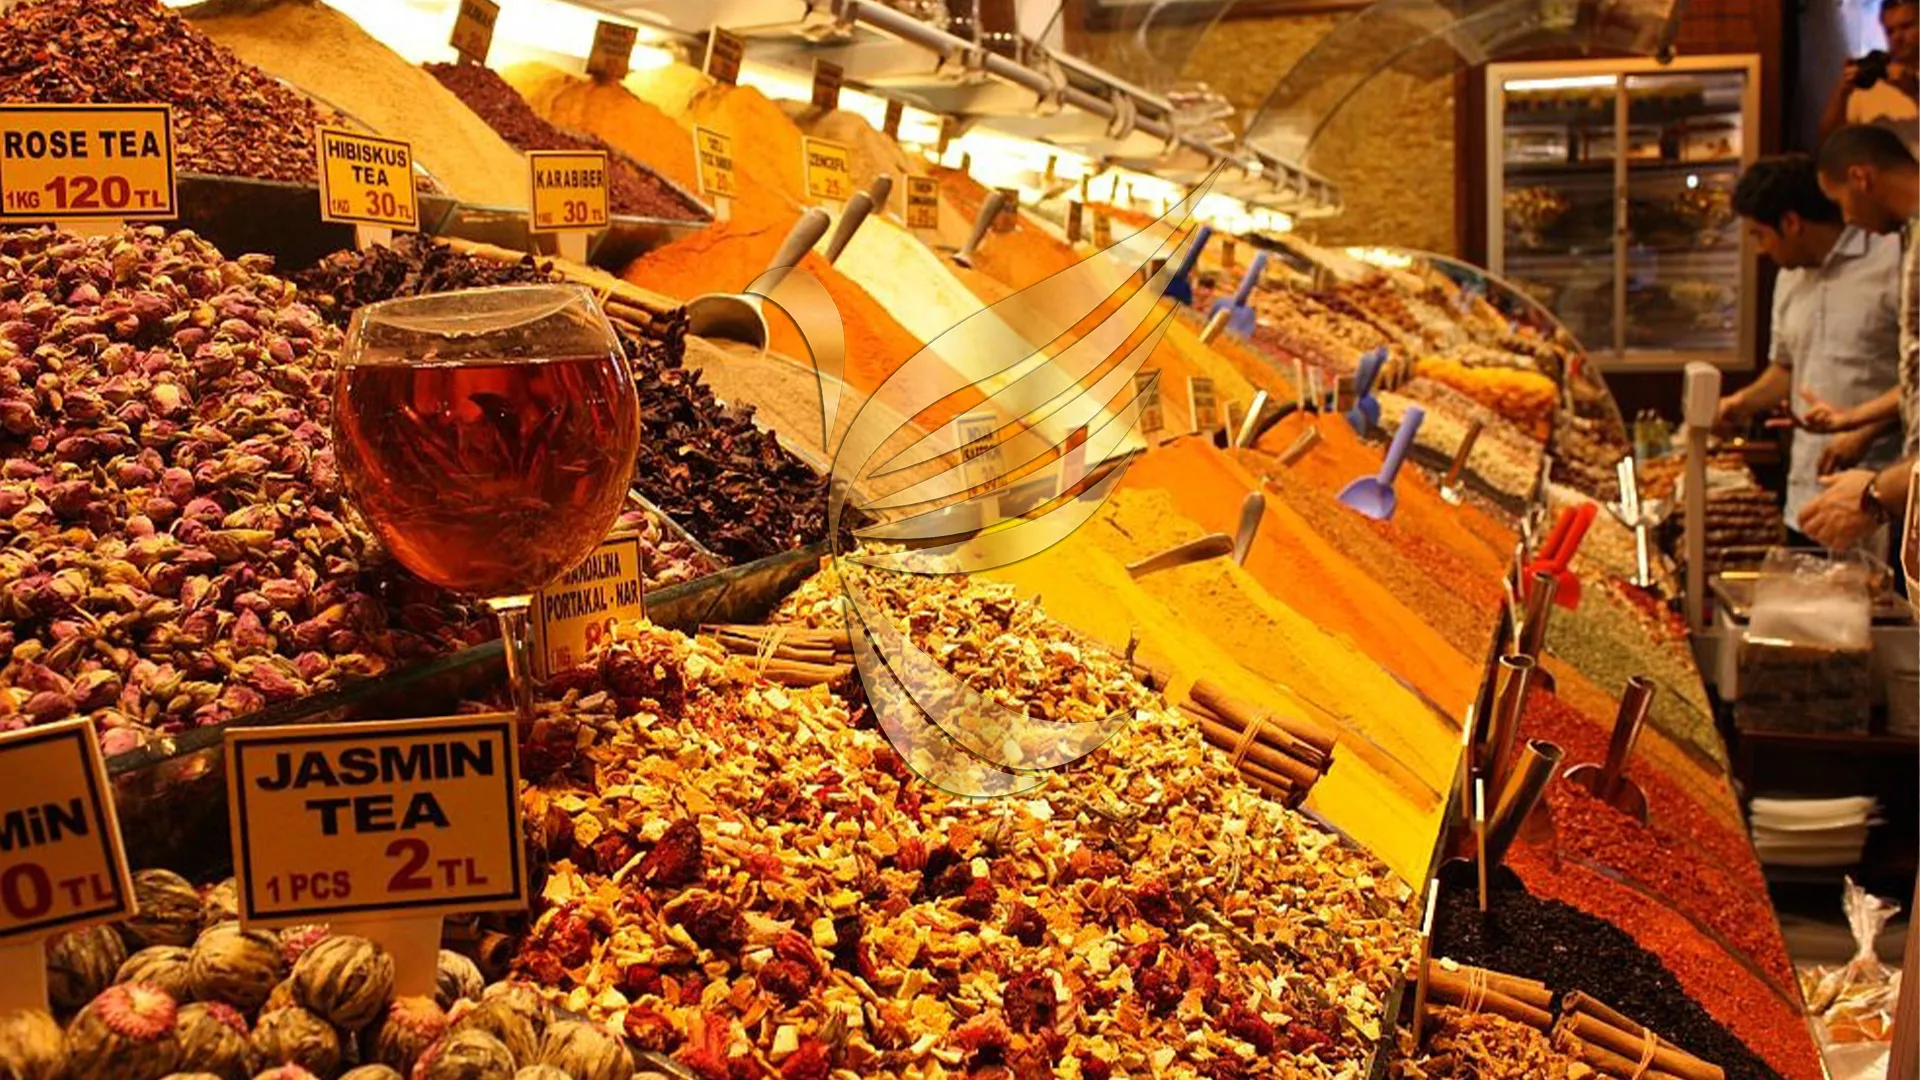 Egyptian Spice Bazaar in Turkey, central_asia | Spices - Country Helper